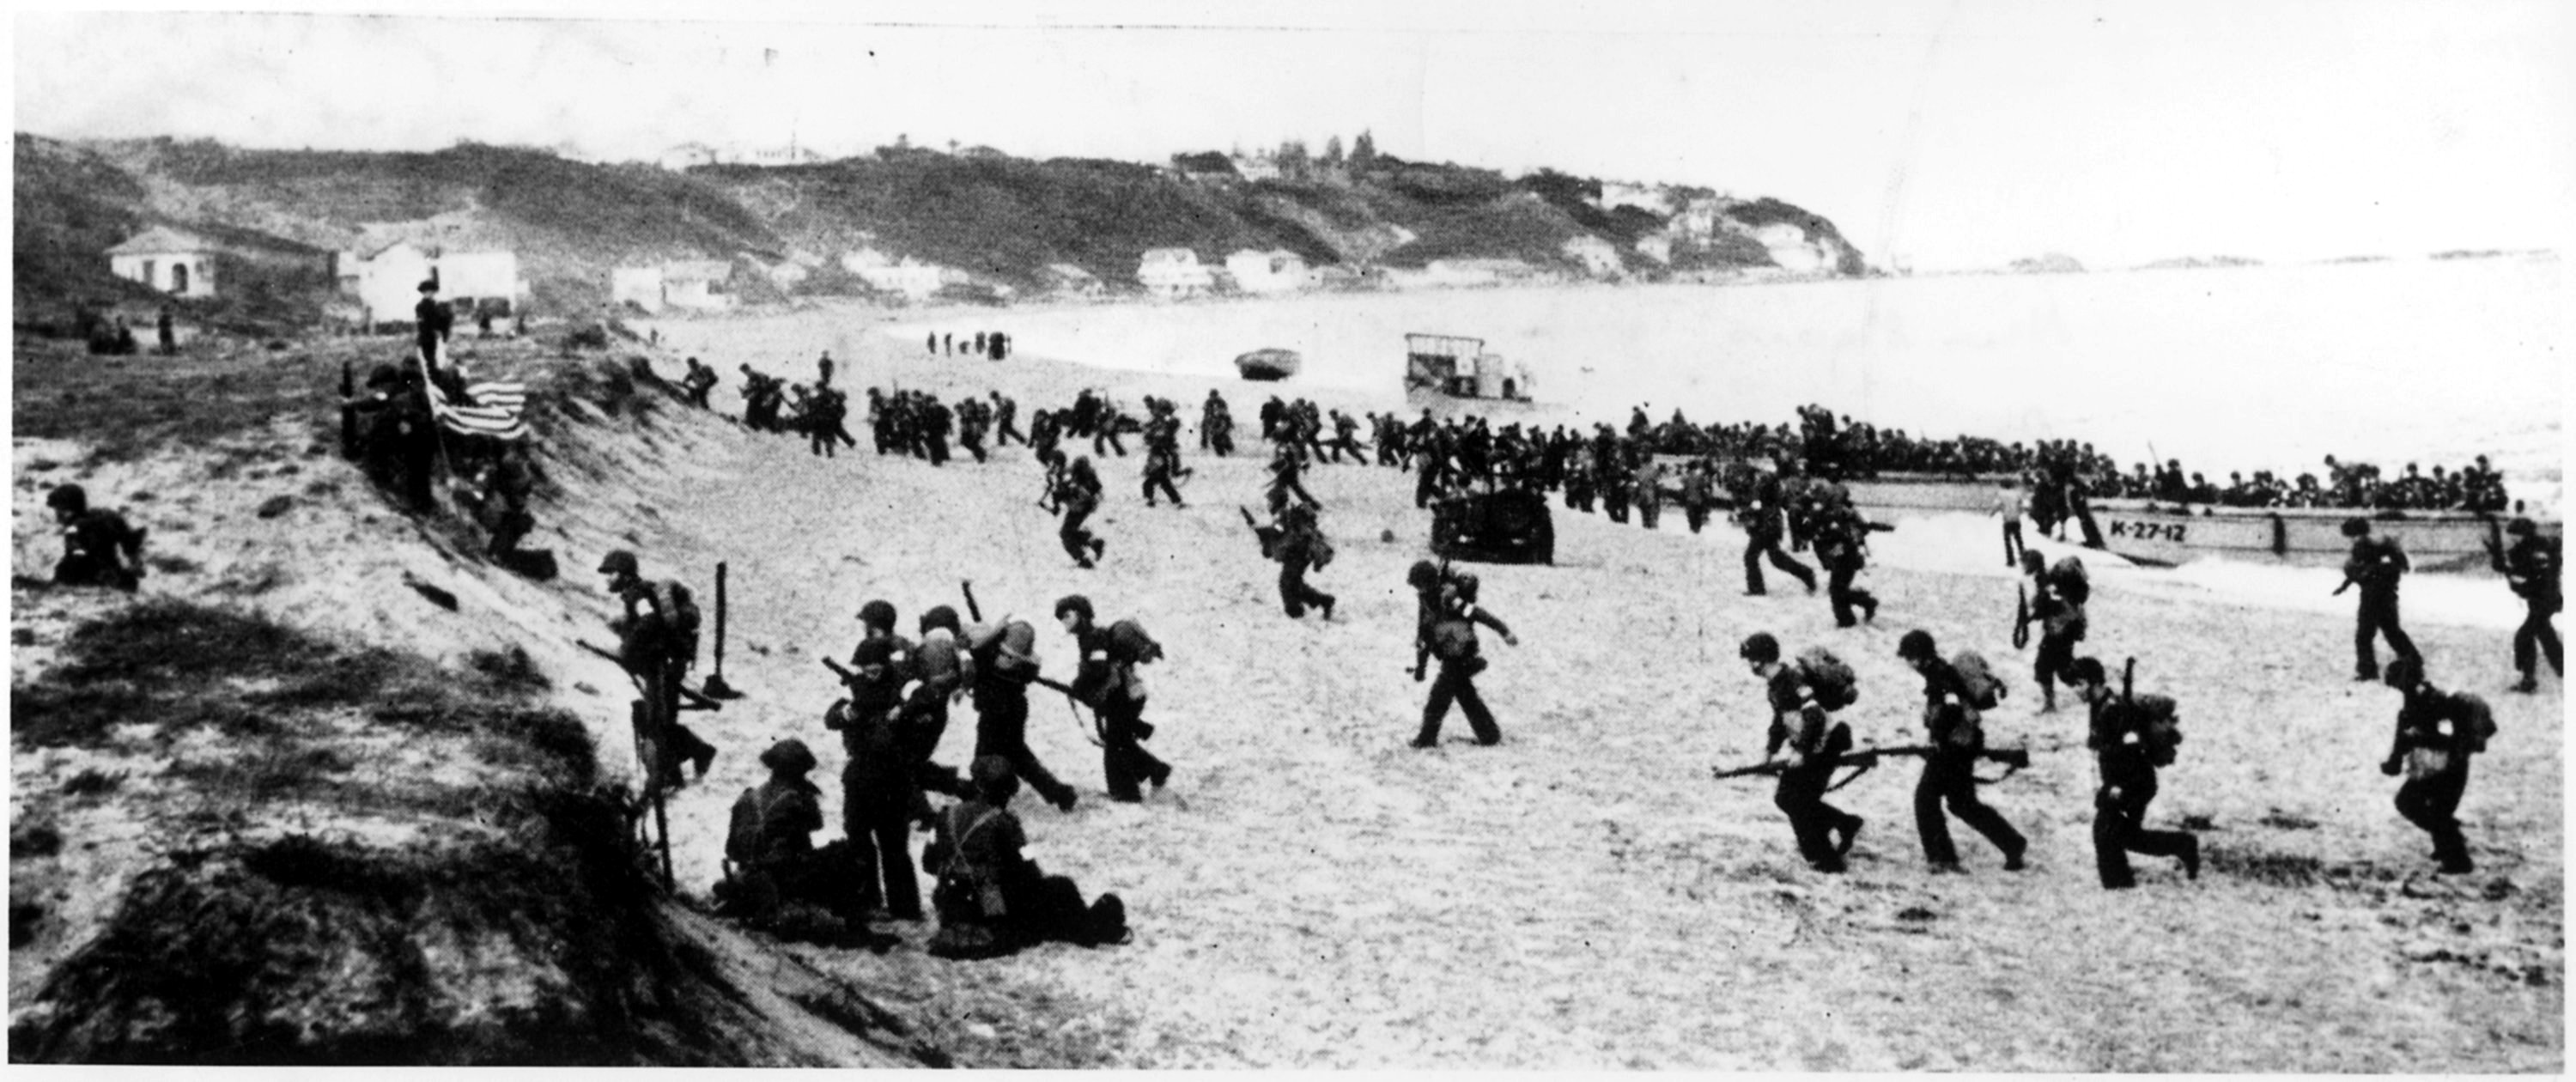 Operation Torch troops hit the beaches